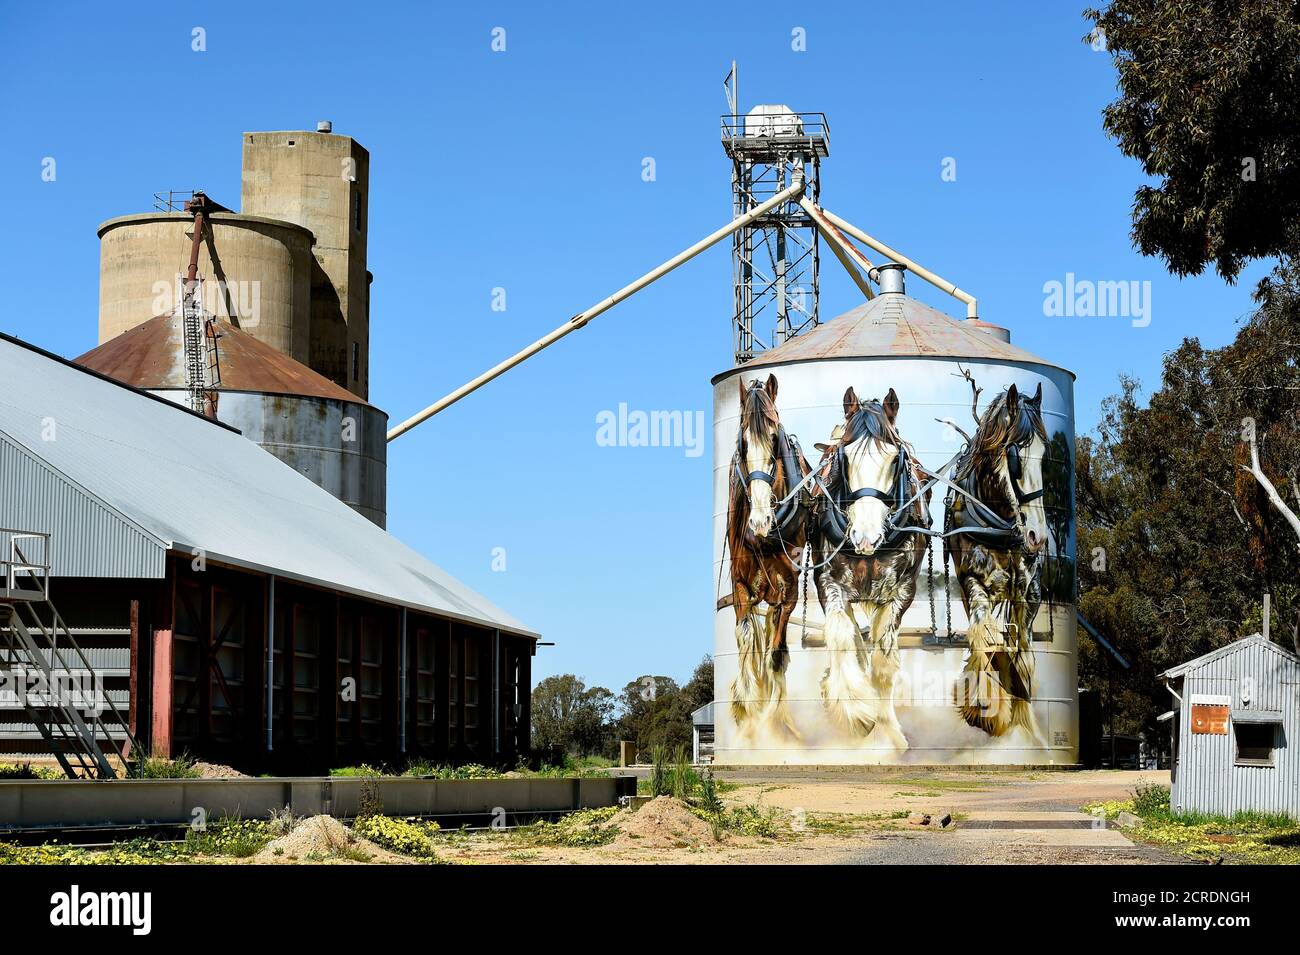 Silo Art Trail. Goorambat Australia. Jimmy DVATE's work of Shire horses on the town's grain silo is hugely popular with tourists. Stock Photo